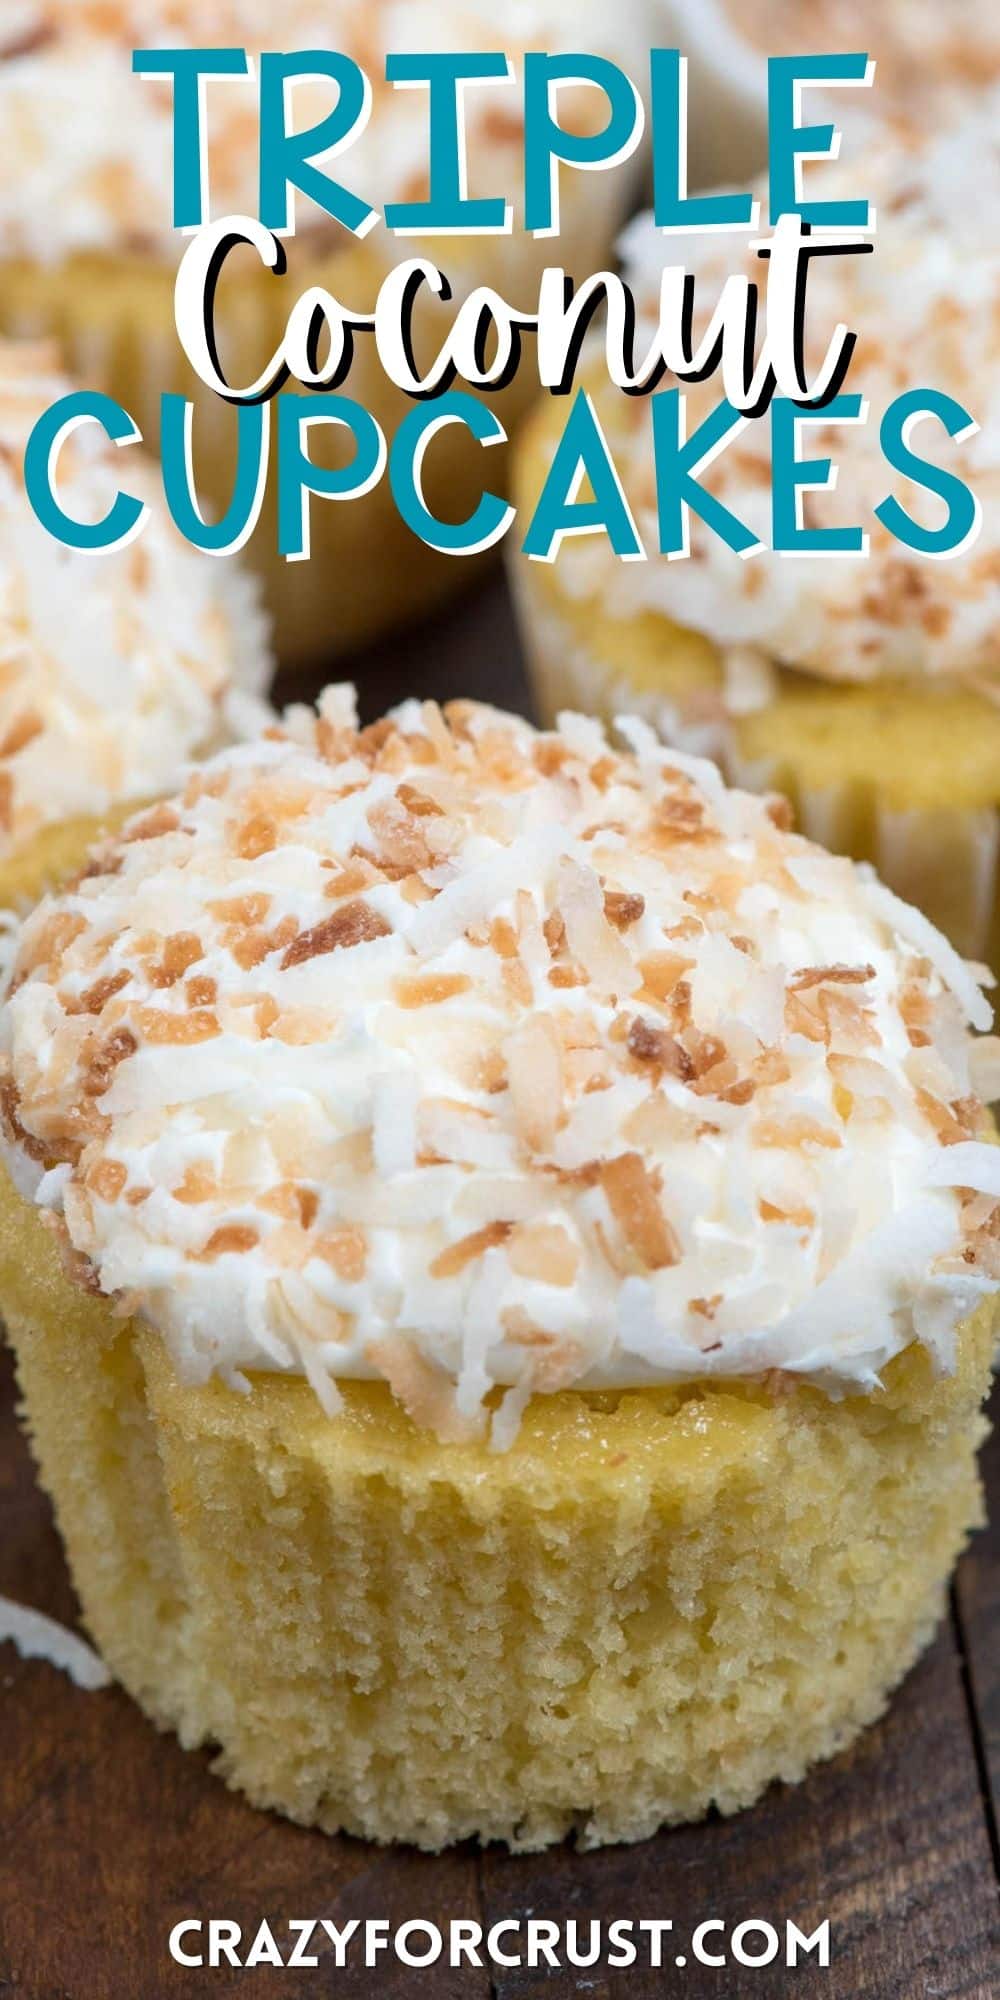 yellow cupcakes with white frosting topped with coconut with words on the image.